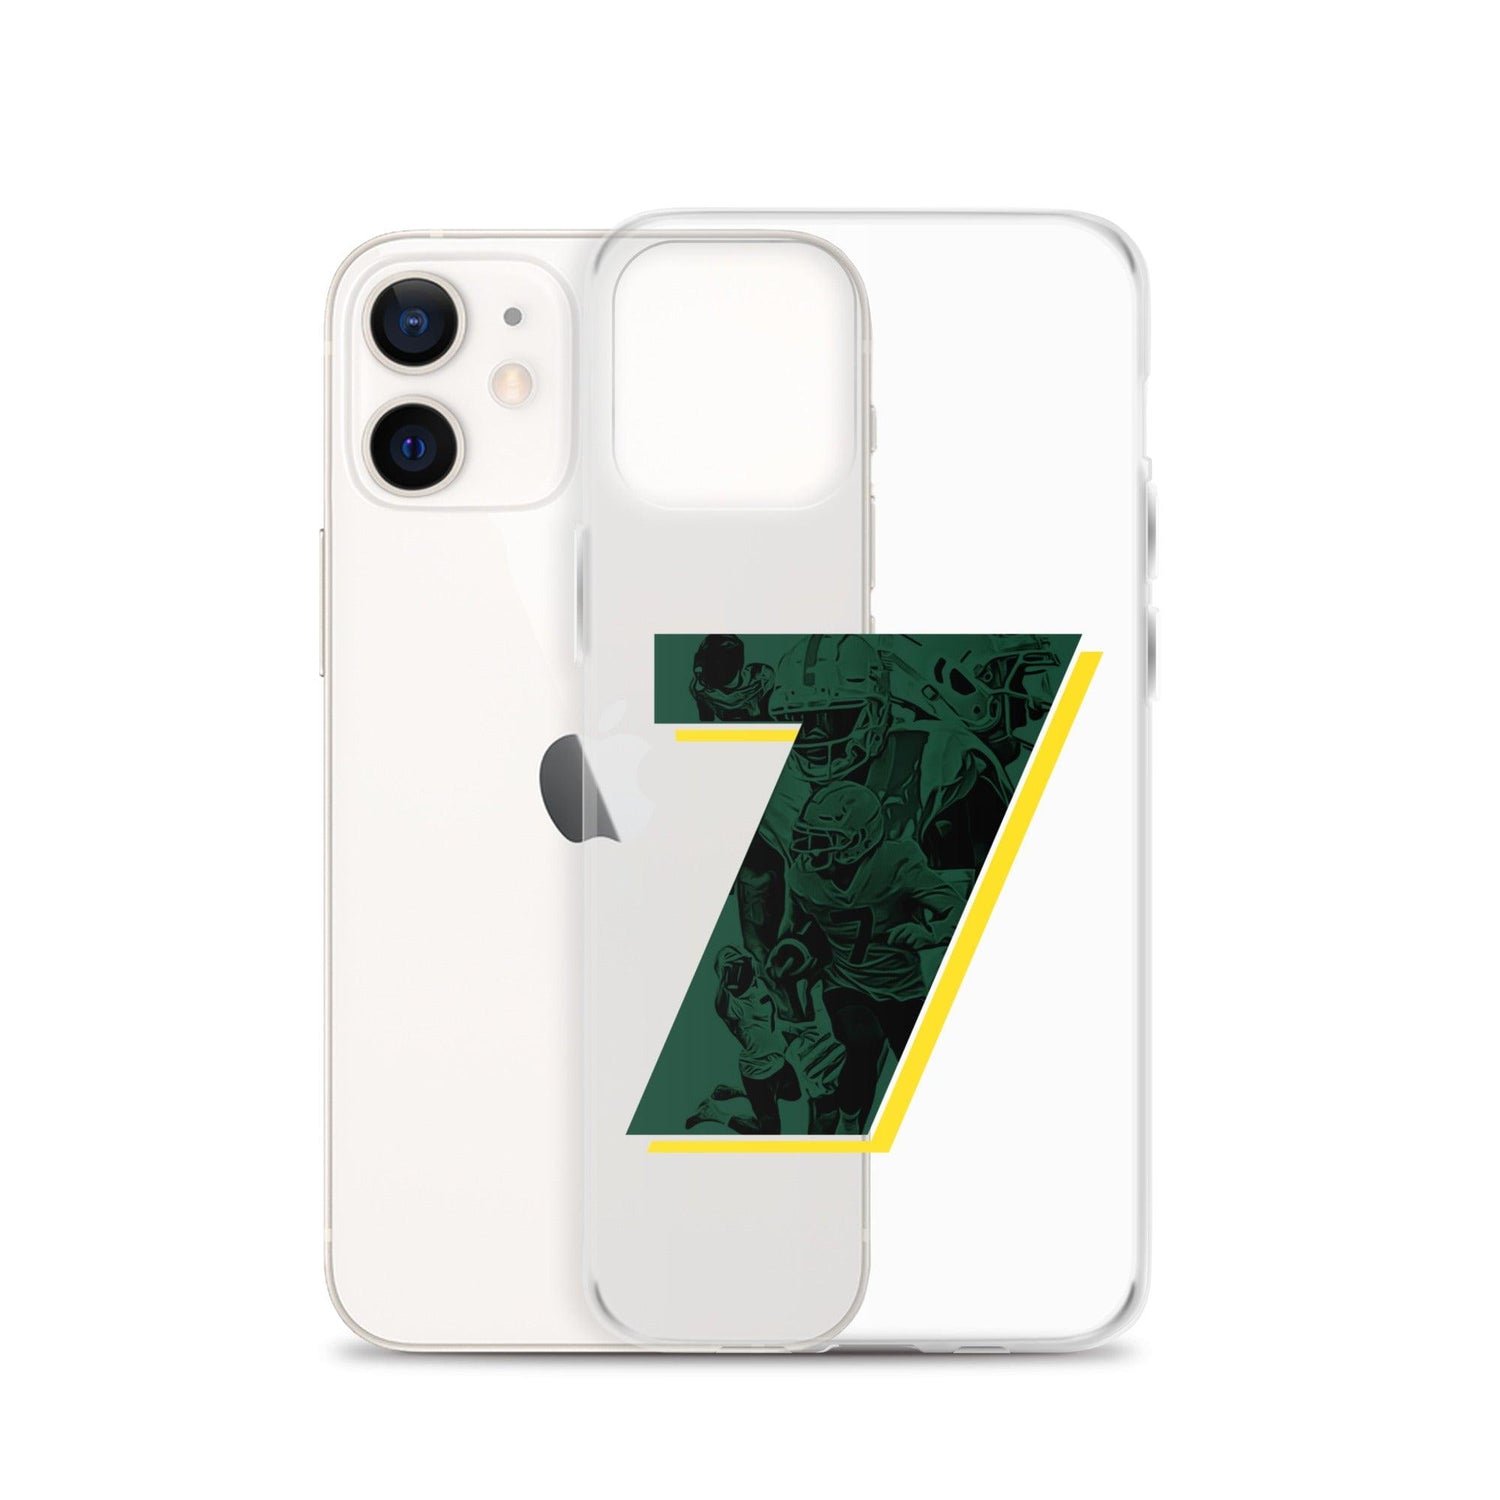 Seven McGee "7" iPhone Case - Fan Arch